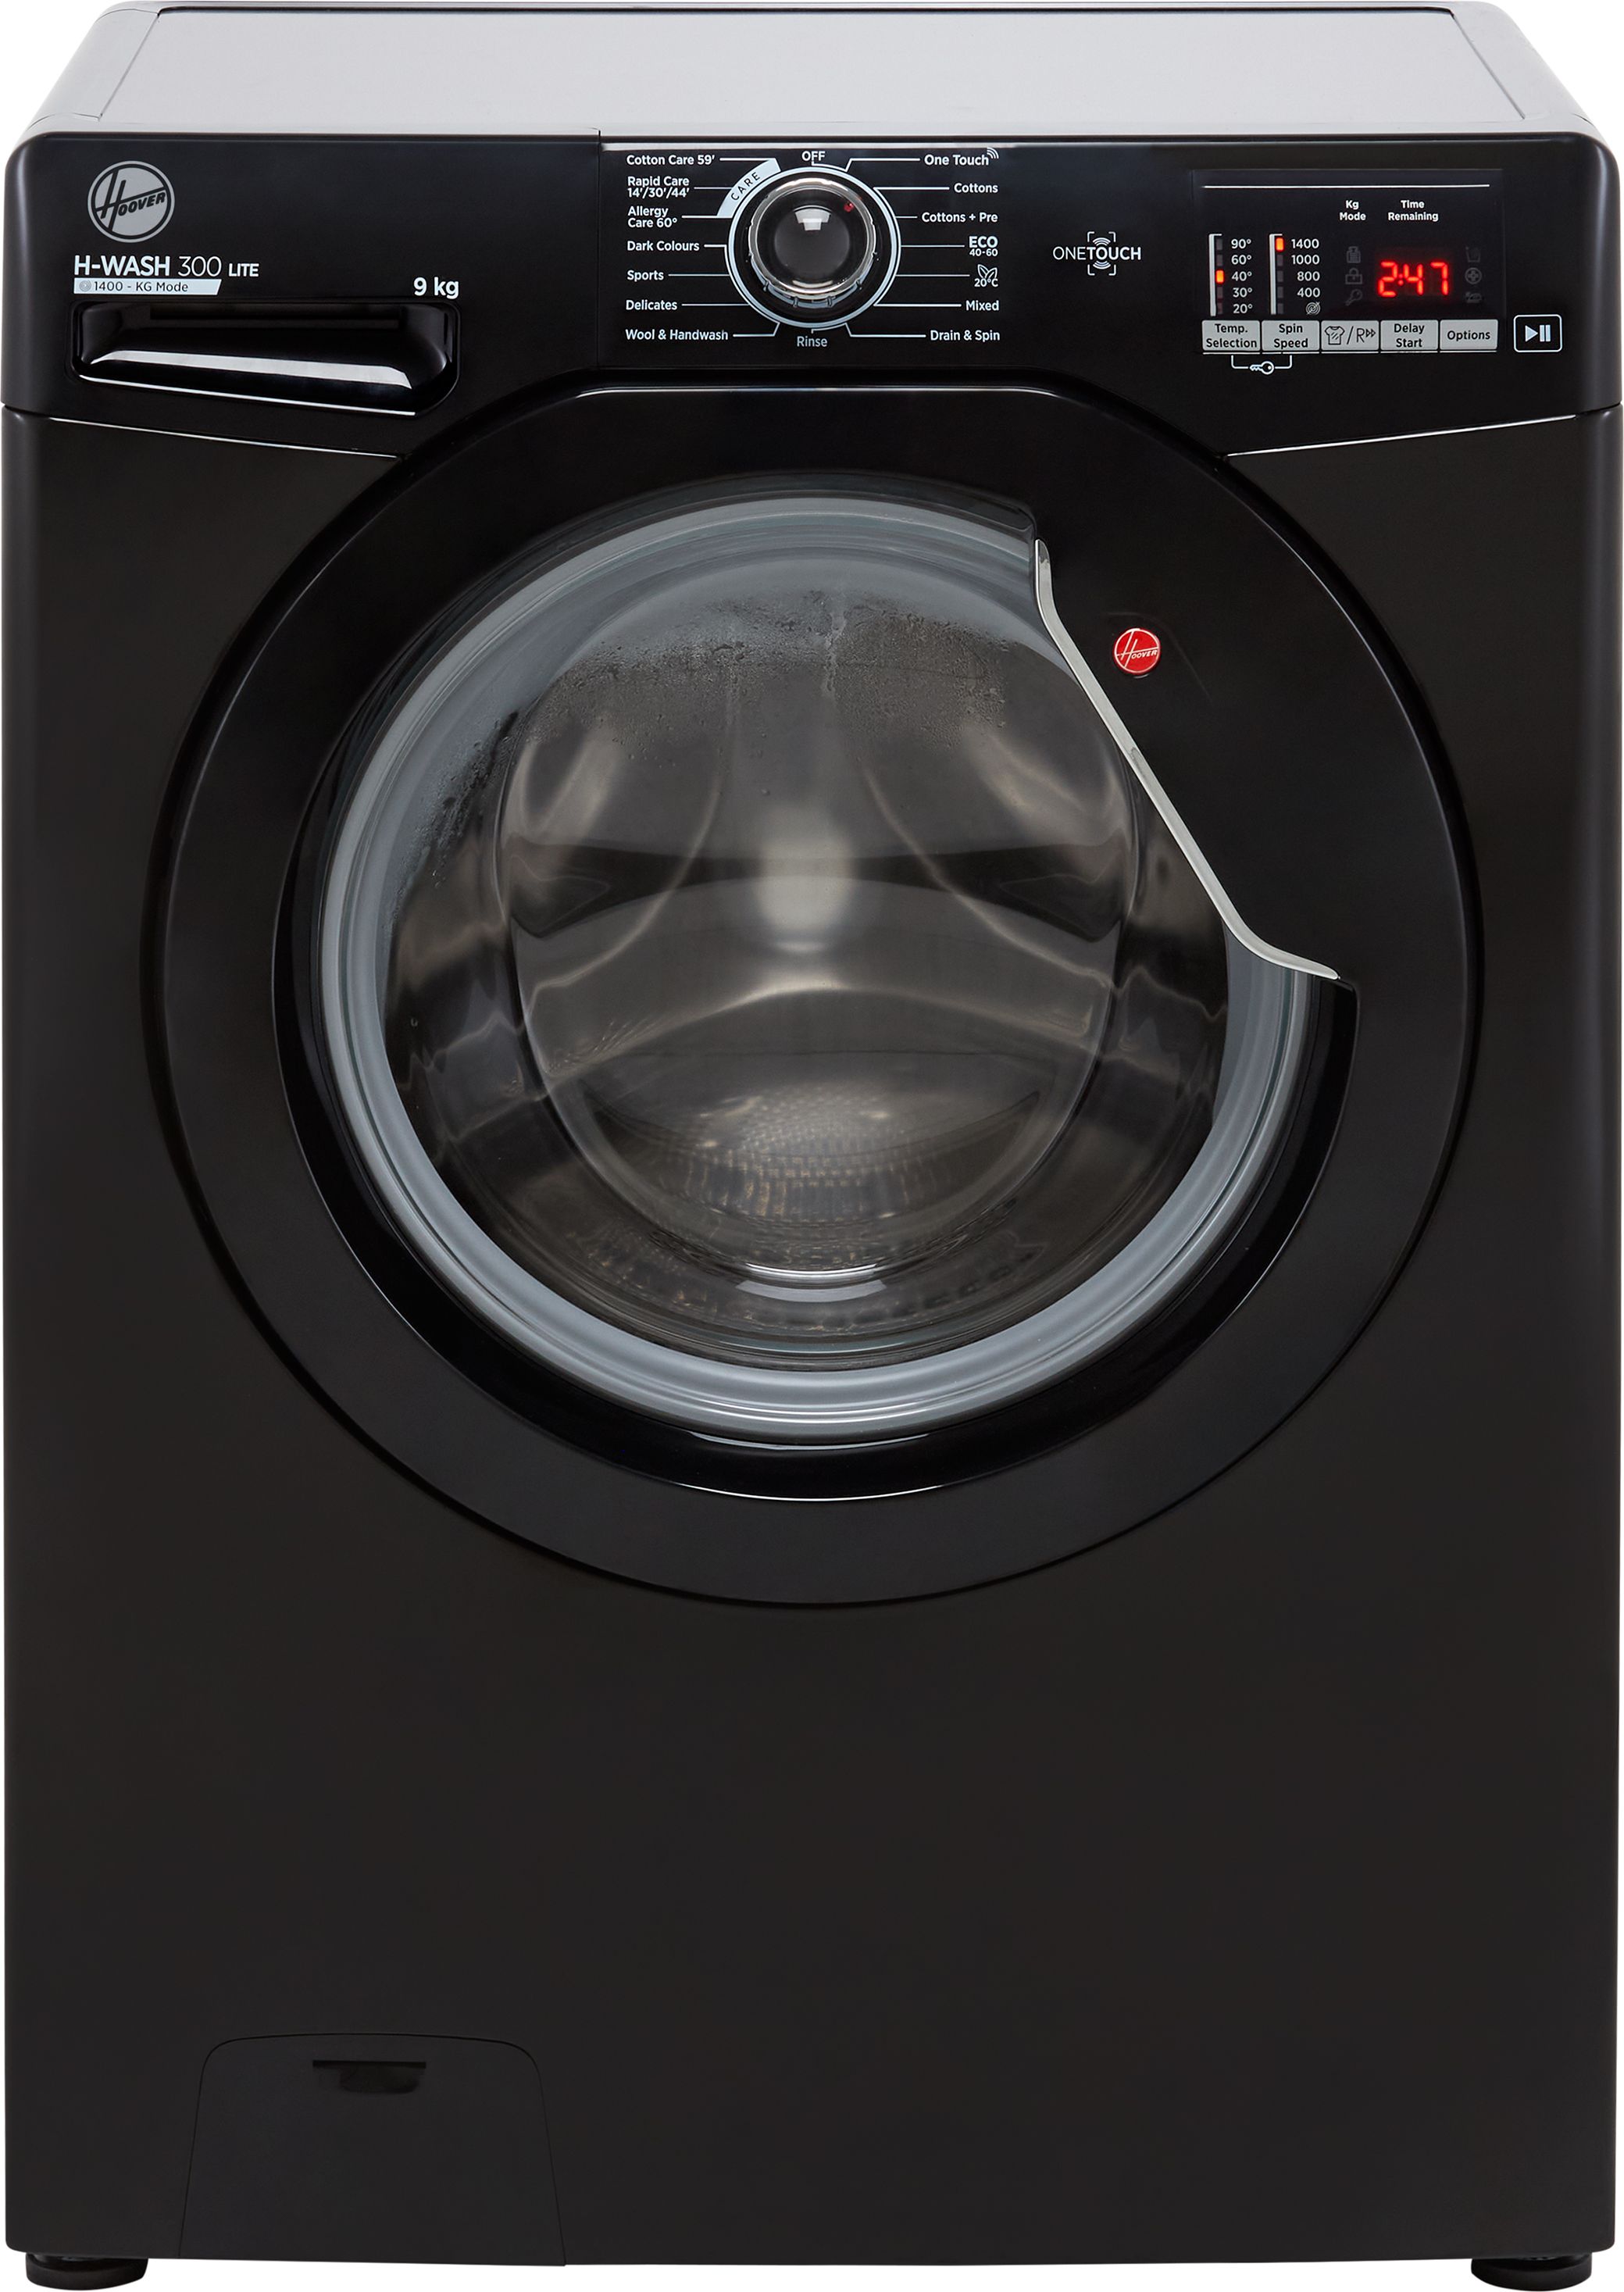 Hoover H-WASH 300 H3W492DBBE/1 9kg Washing Machine with 1400 rpm - Black - D Rated, Black